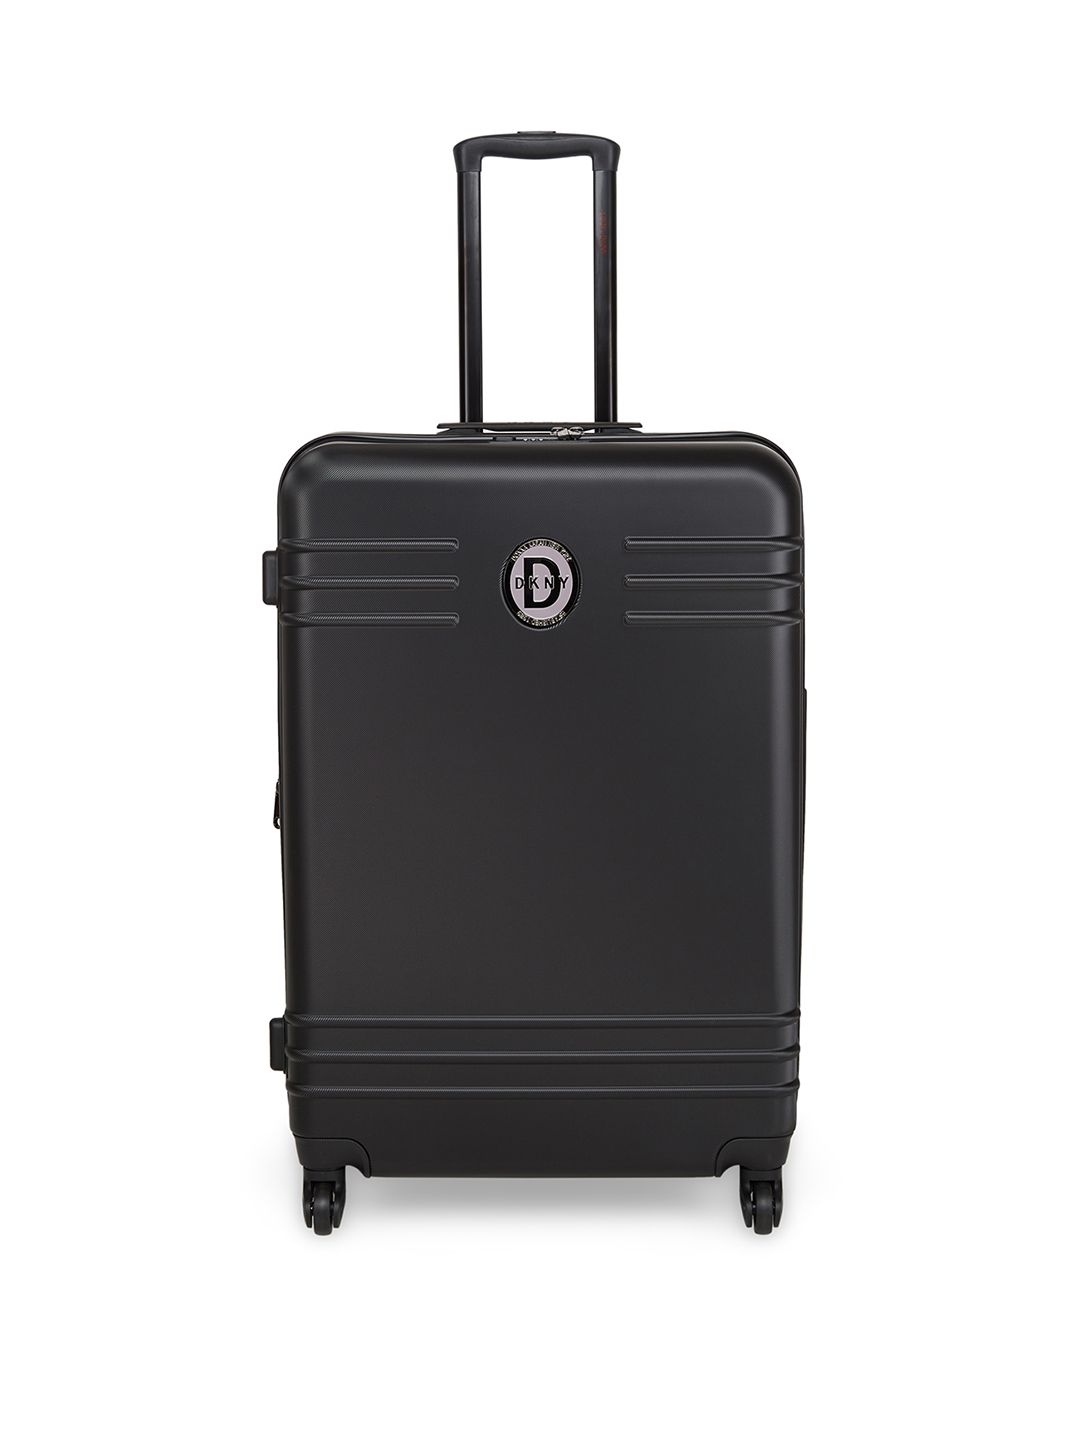 DKNY ECLIPSE Rang Black Hard-Sided Trolley Suitcase Price in India